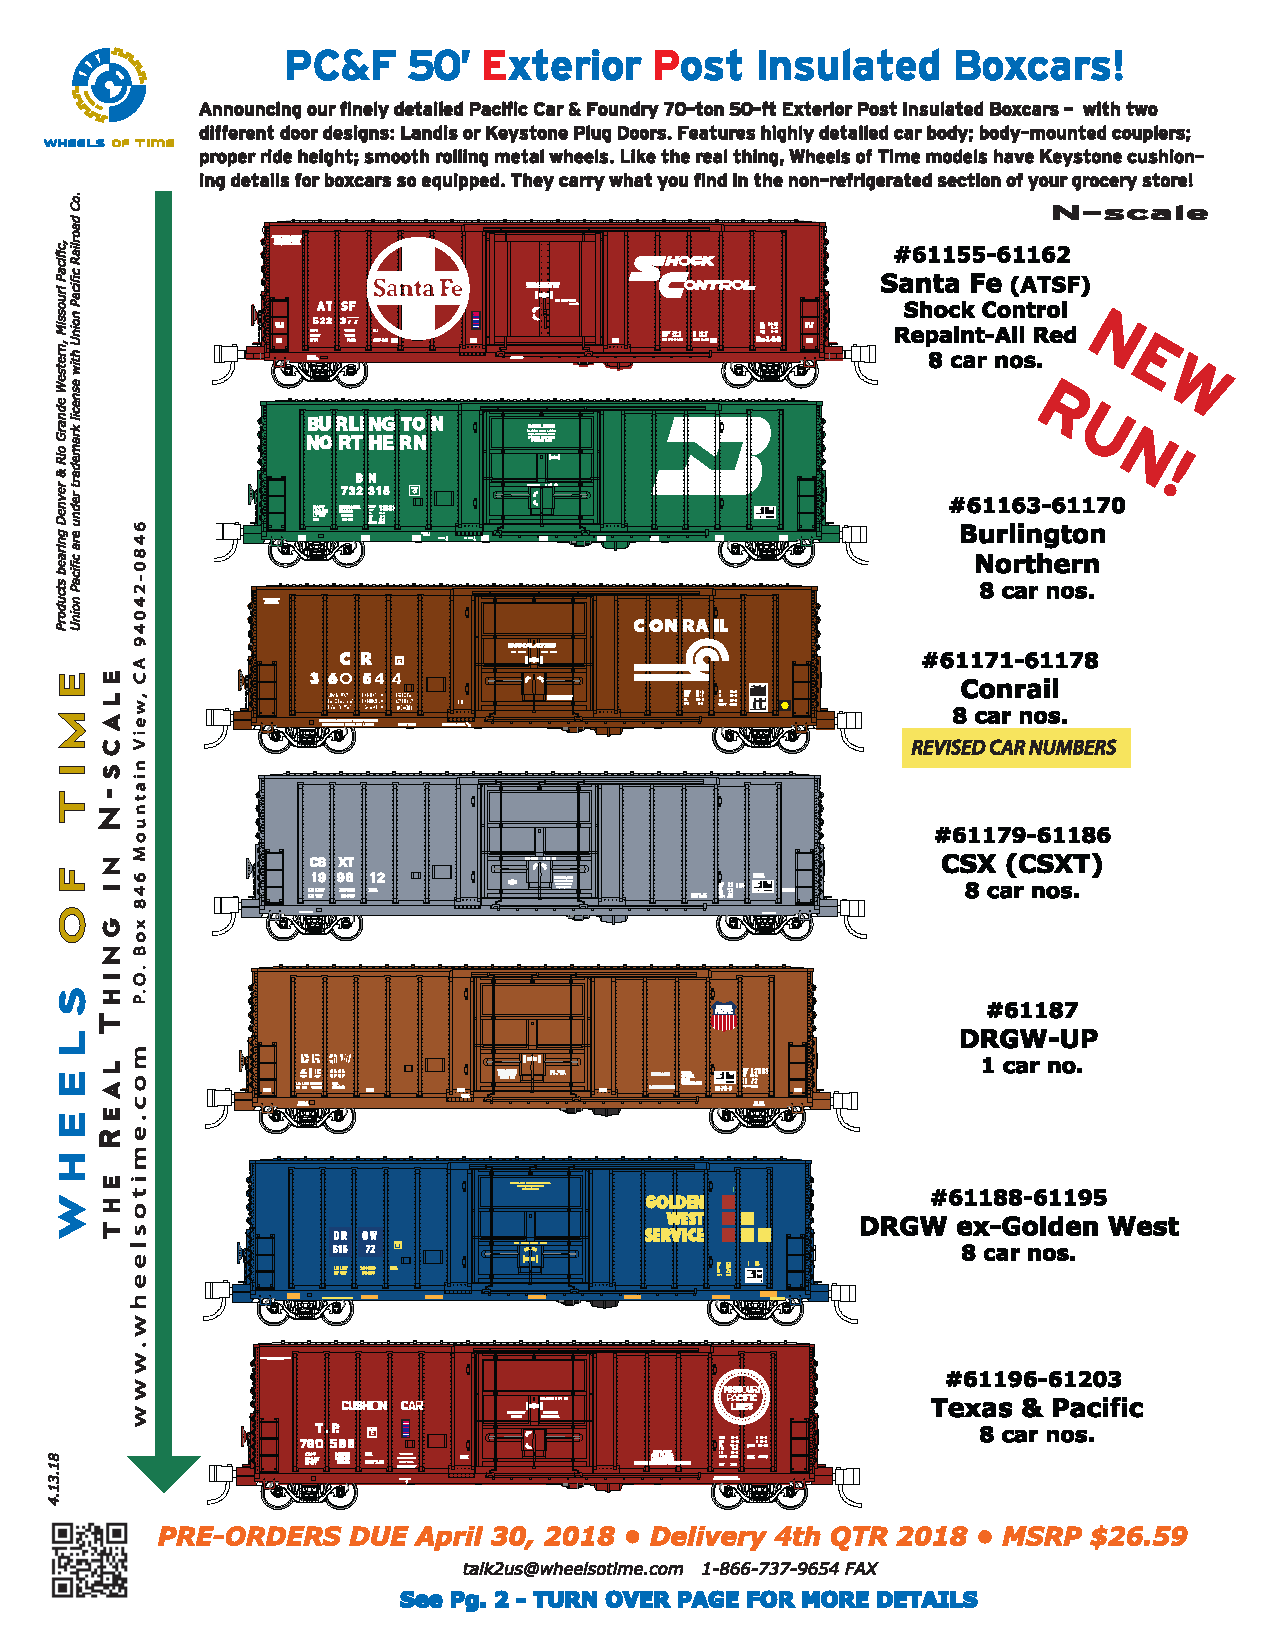 N Scale PC&F 50ft Insulated Boxcar Conrail 360526 Wheels of Time 61174 